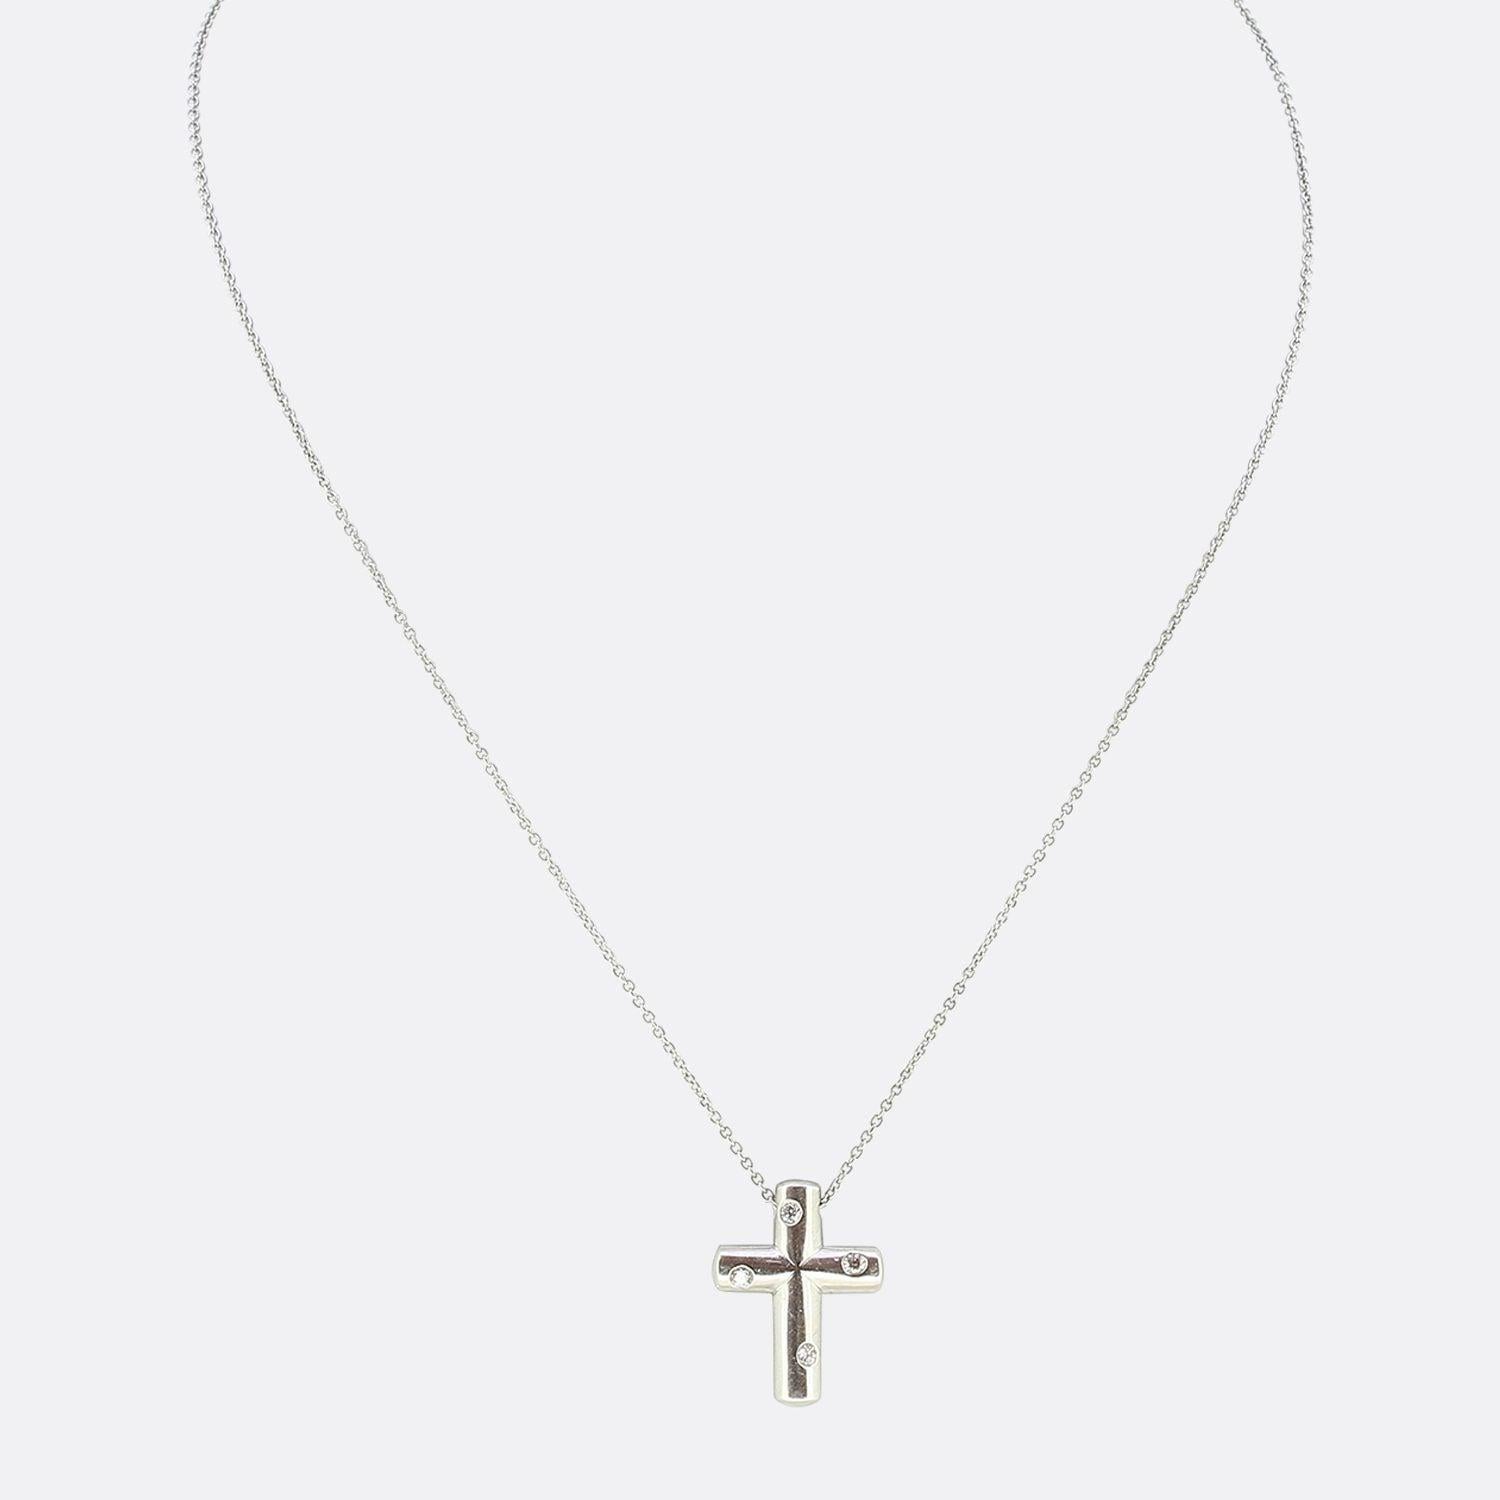 This is a platinum, diamond pendant from the luxury jewellery designer Tiffany & Co. The necklace is in a cross motif crafted in platinum and set with four round brilliant cut diamonds. The pendant has been suspended on a platinum chain.